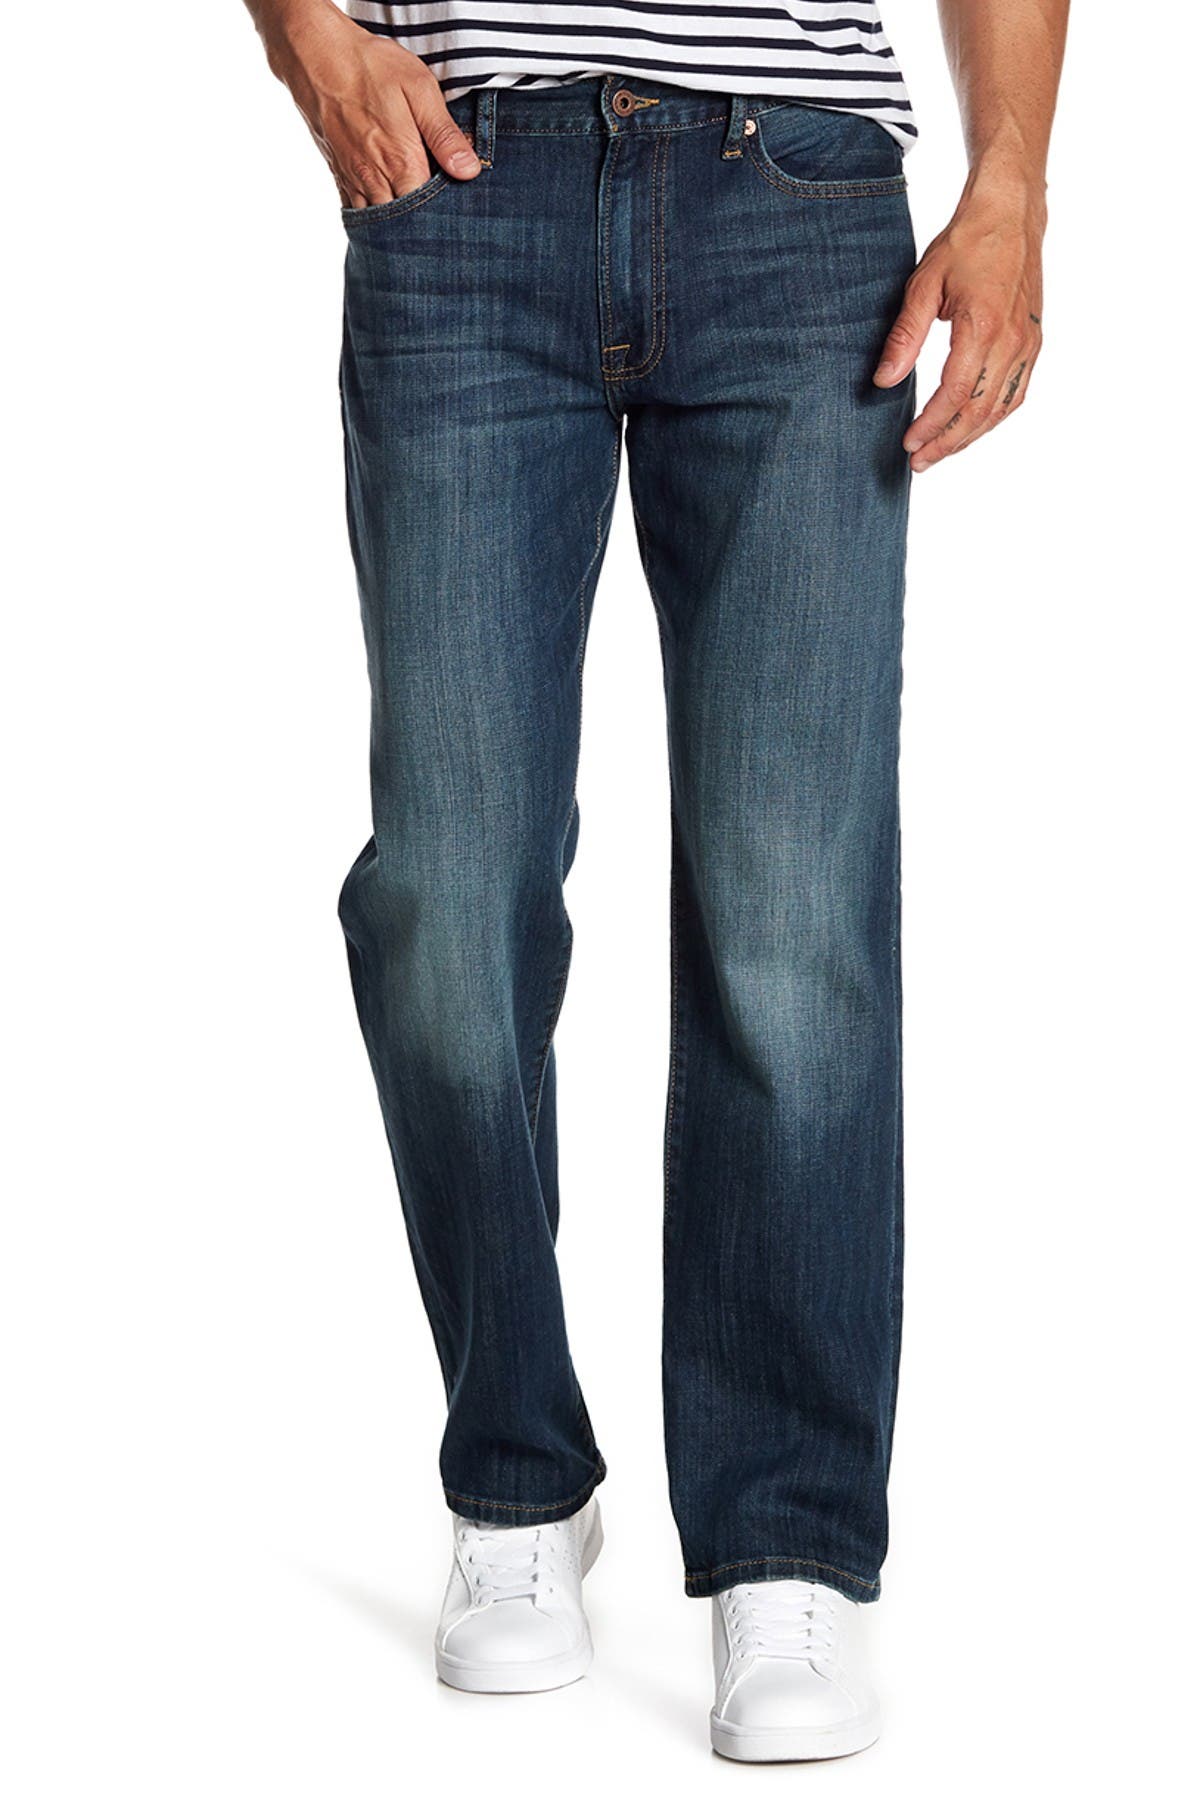 429 classic straight lucky jeans